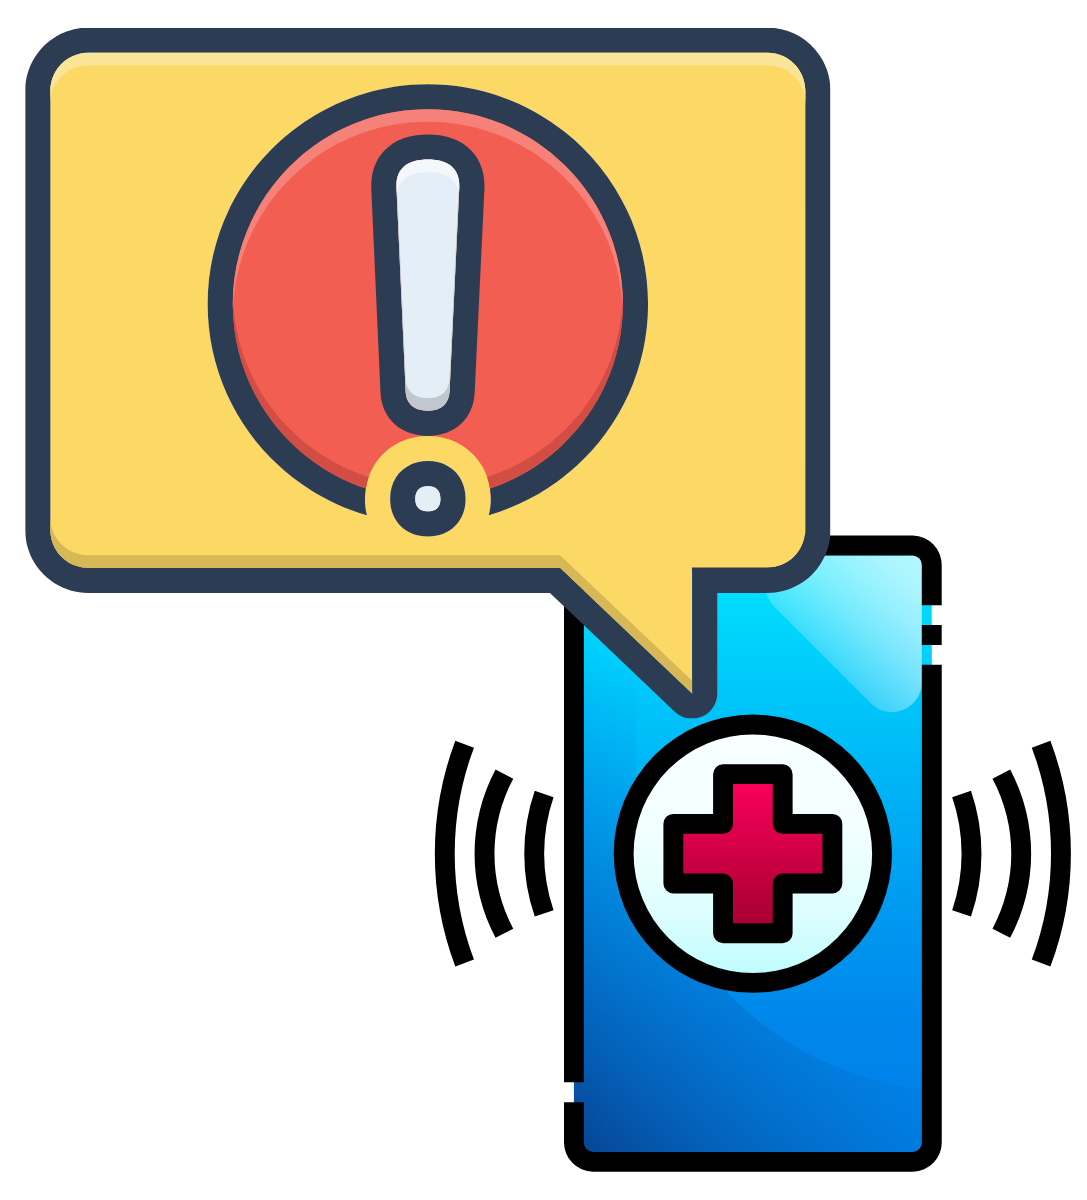 Phone with health symbol showing warning icon